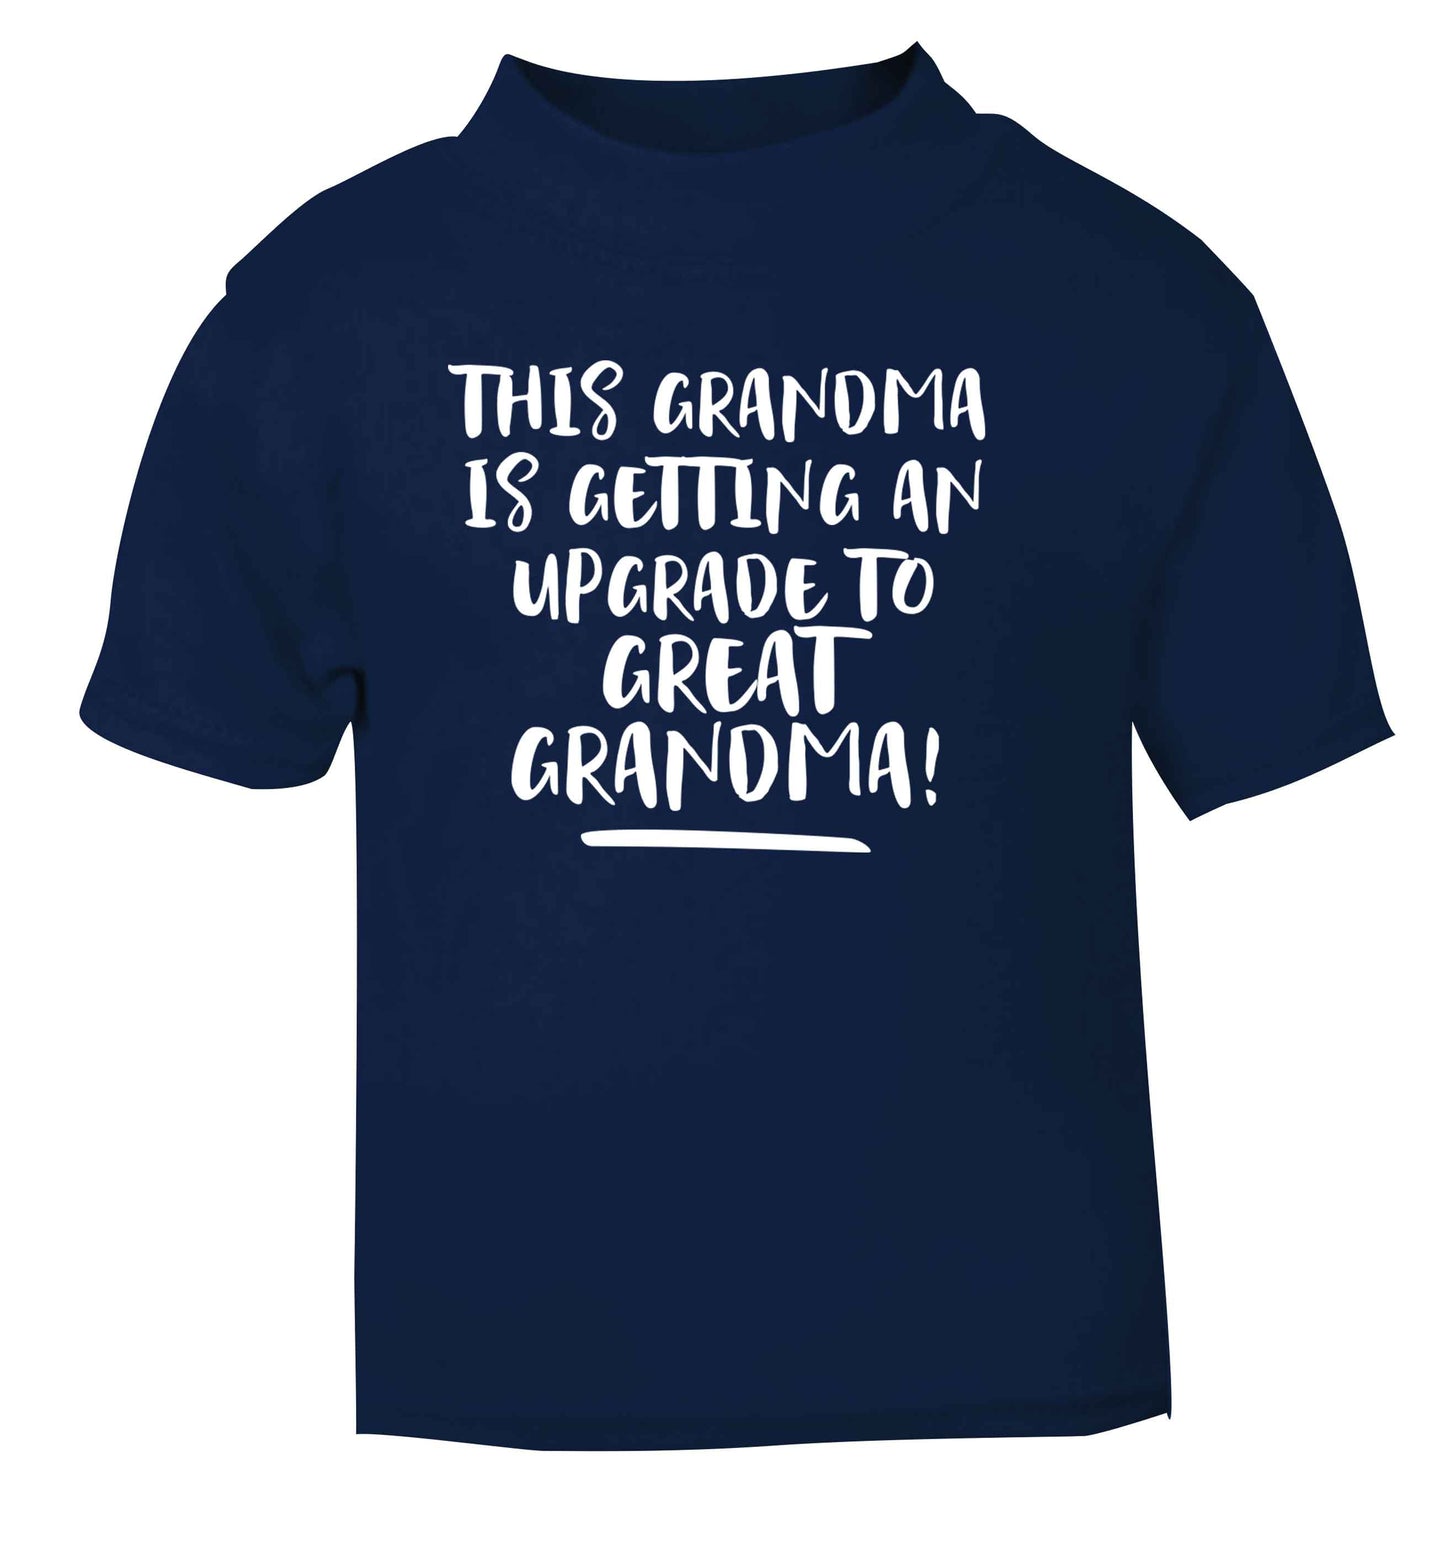 This grandma is getting an upgrade to great grandma! navy Baby Toddler Tshirt 2 Years